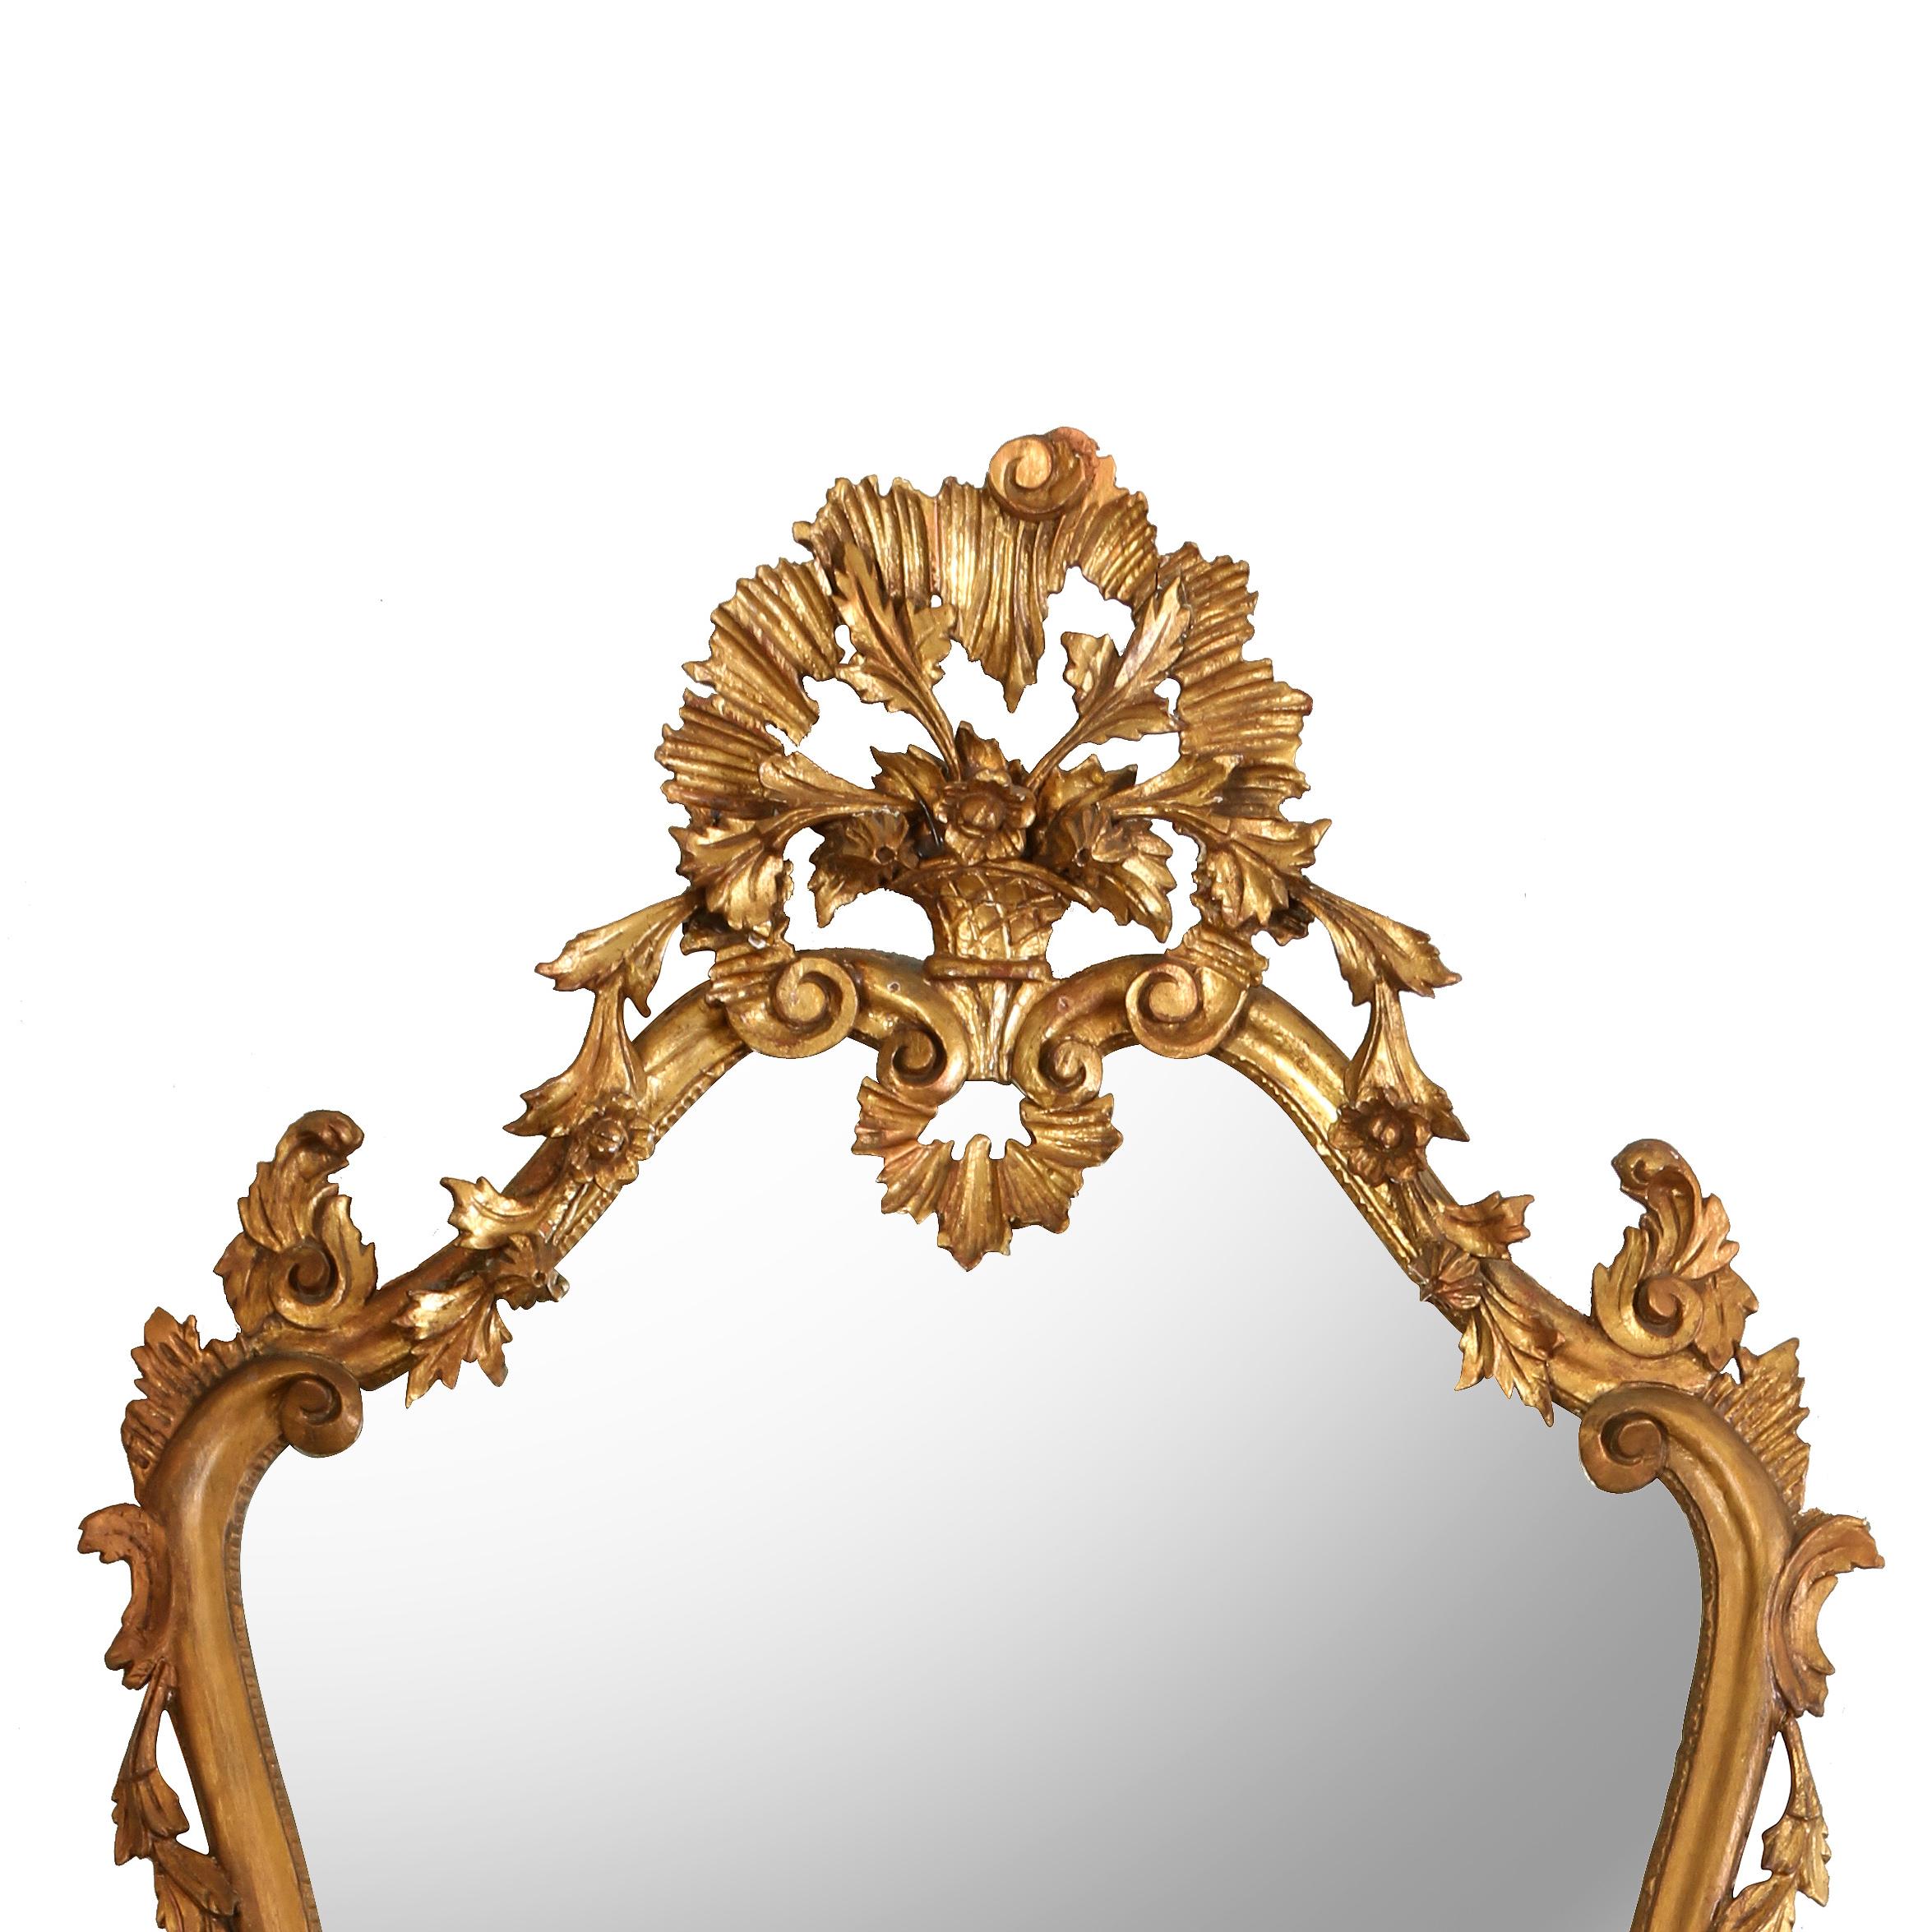 20th Century Ornate Italian Giltwood Mirror With Foliate Detail For Sale